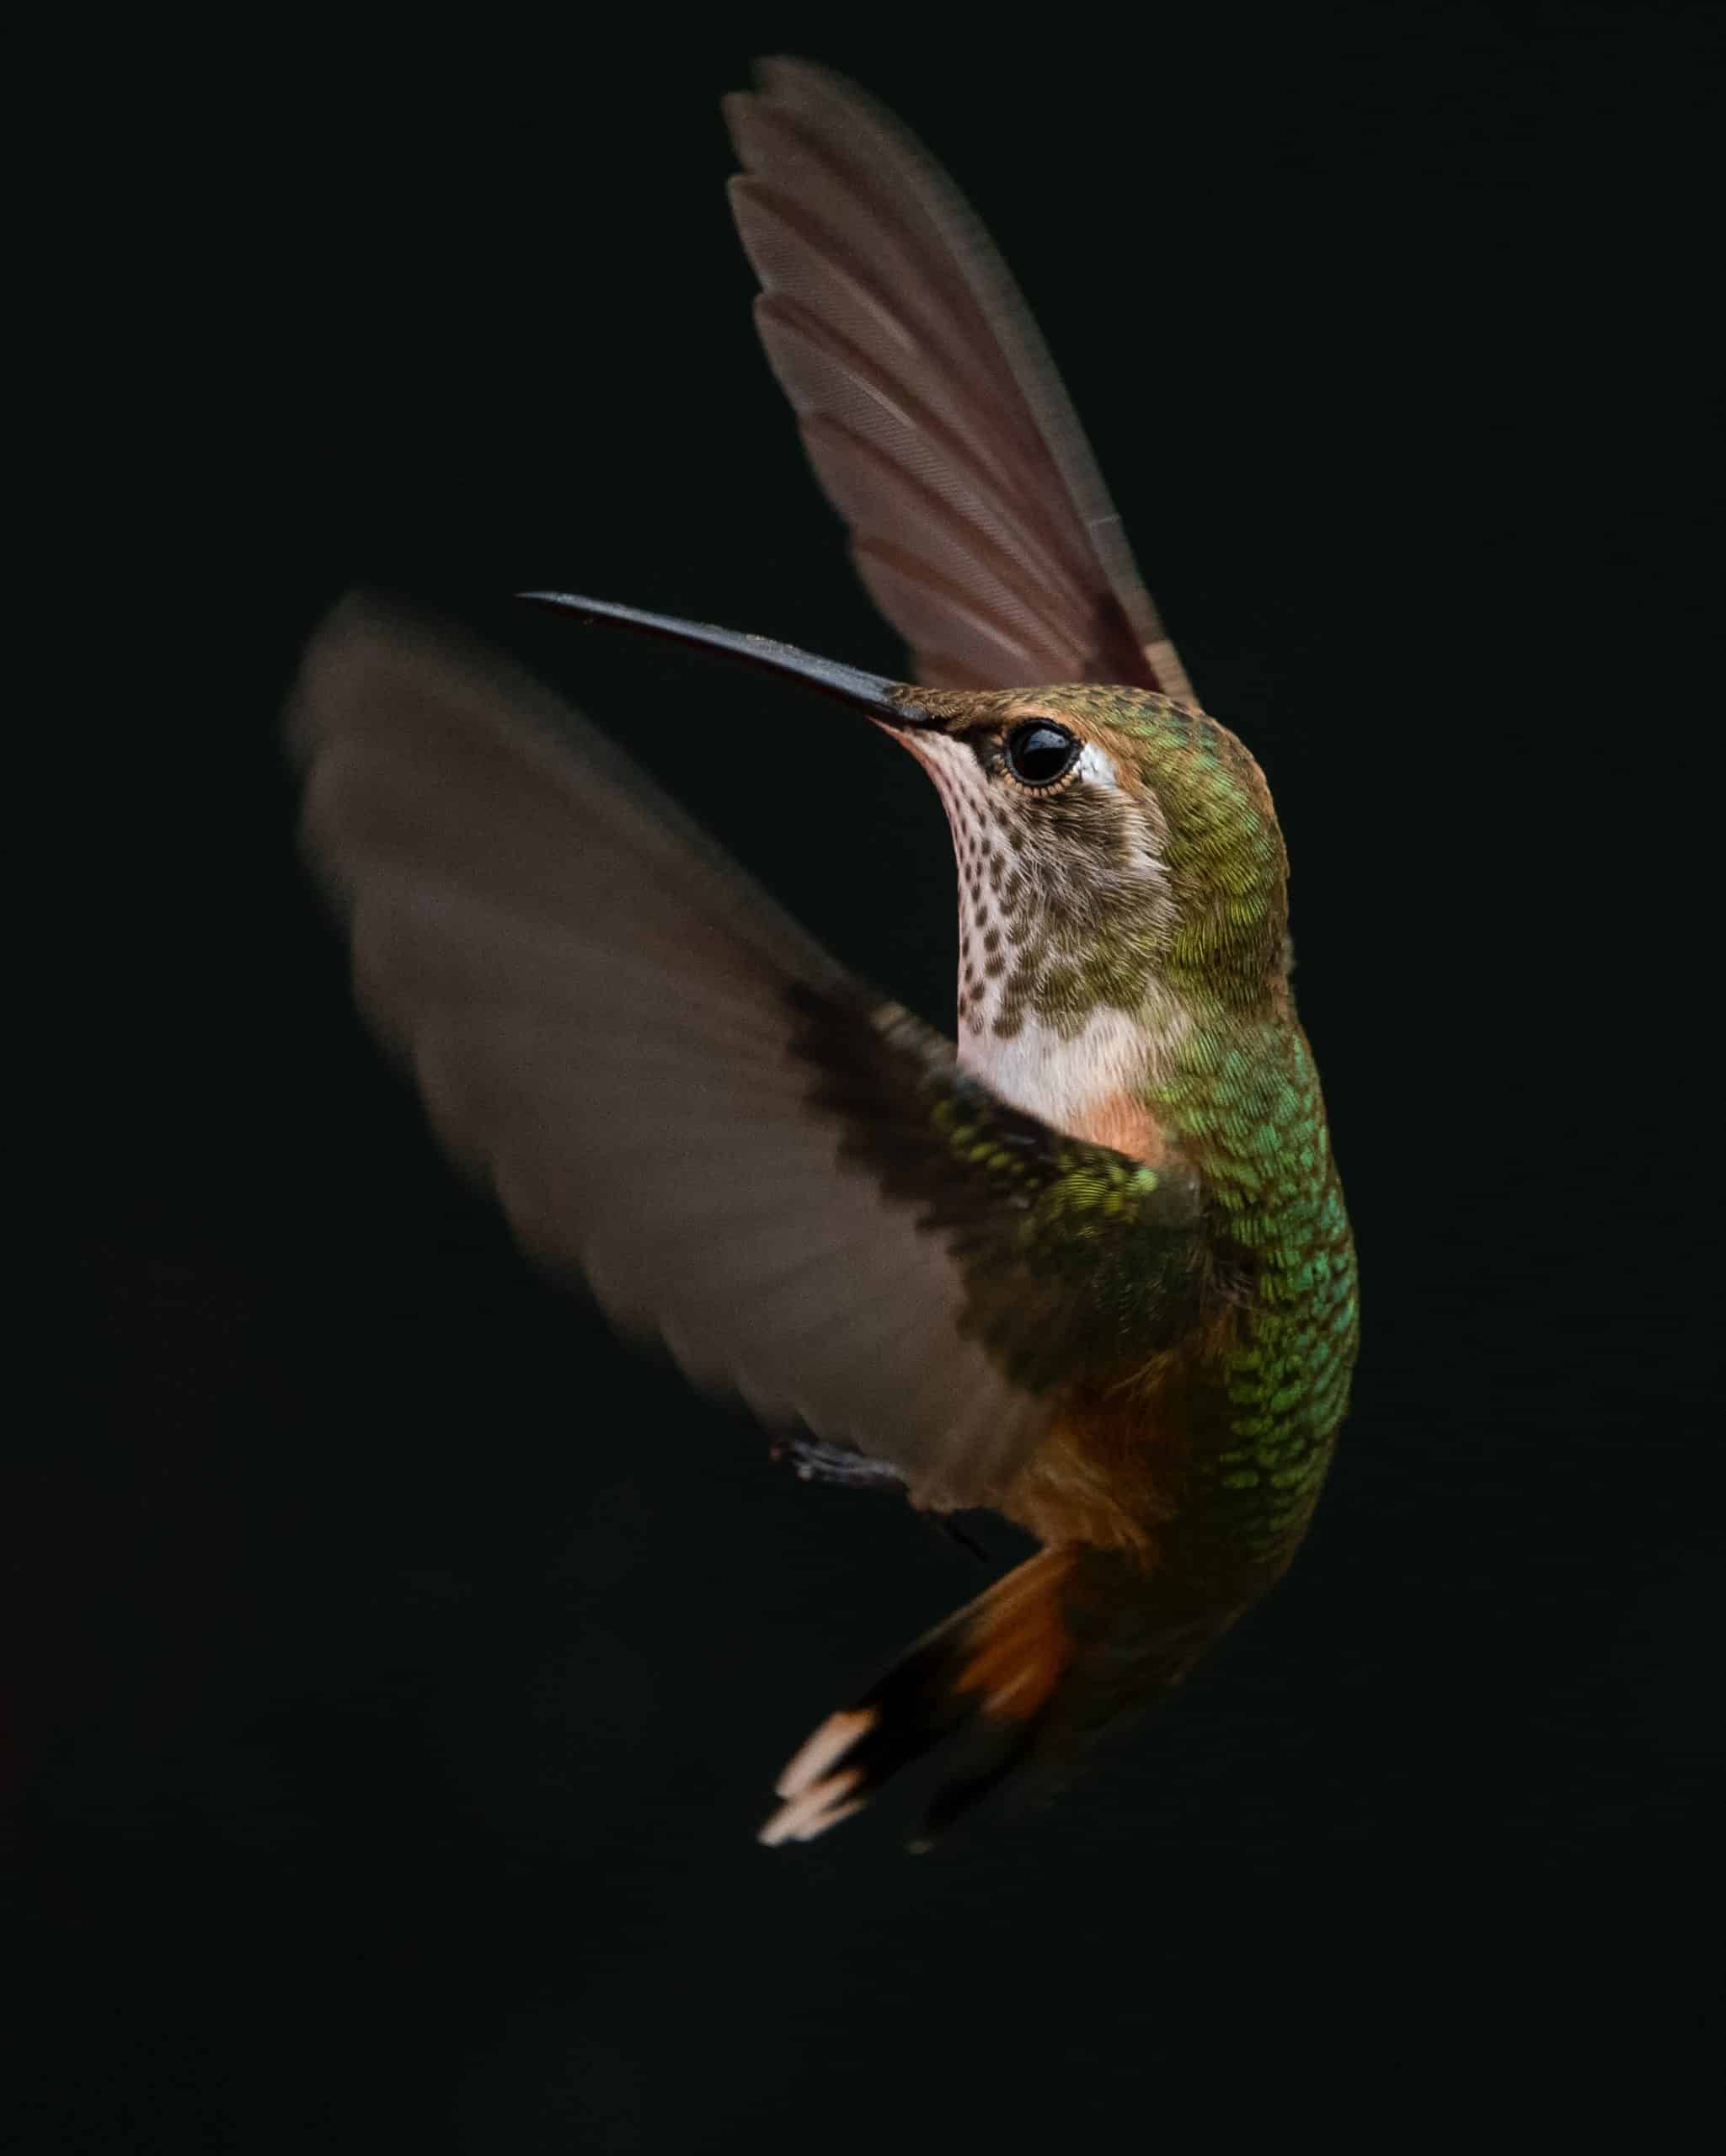 A green-bodied hummingbird with its wings outstretched